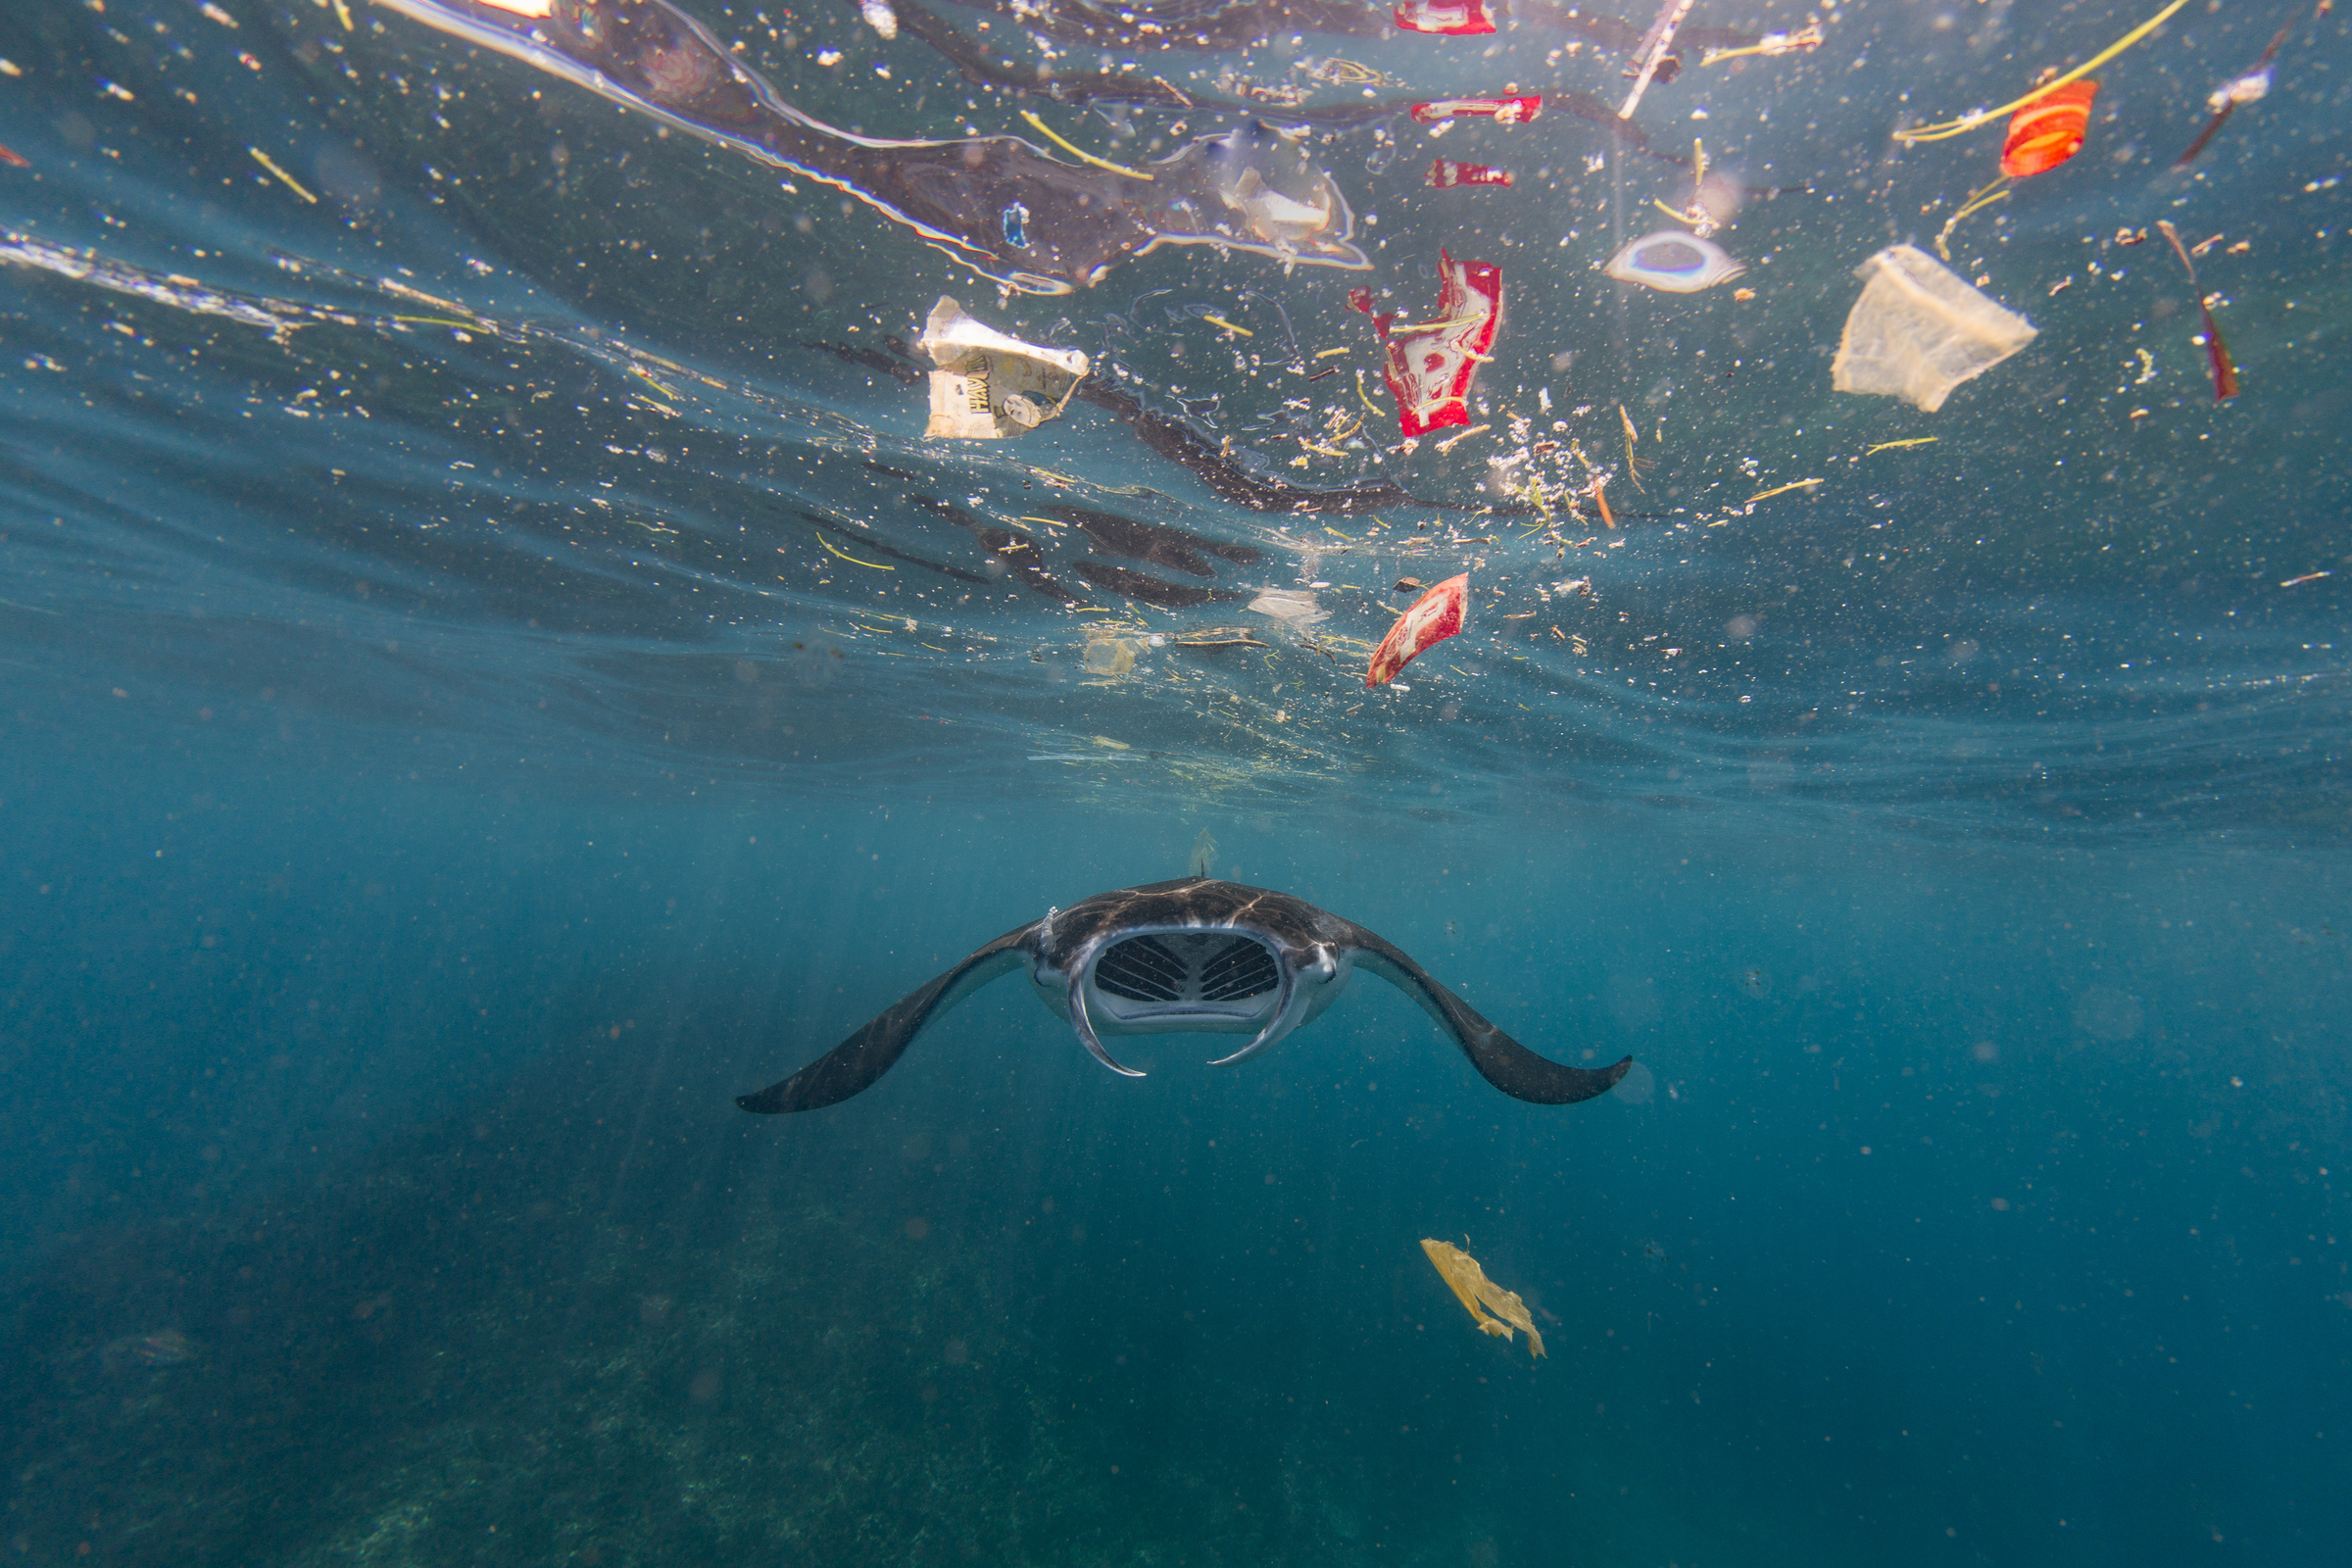 A reef manta ray (Mobula alfredi) swimming in the ocean surrounded by plastic waste, 